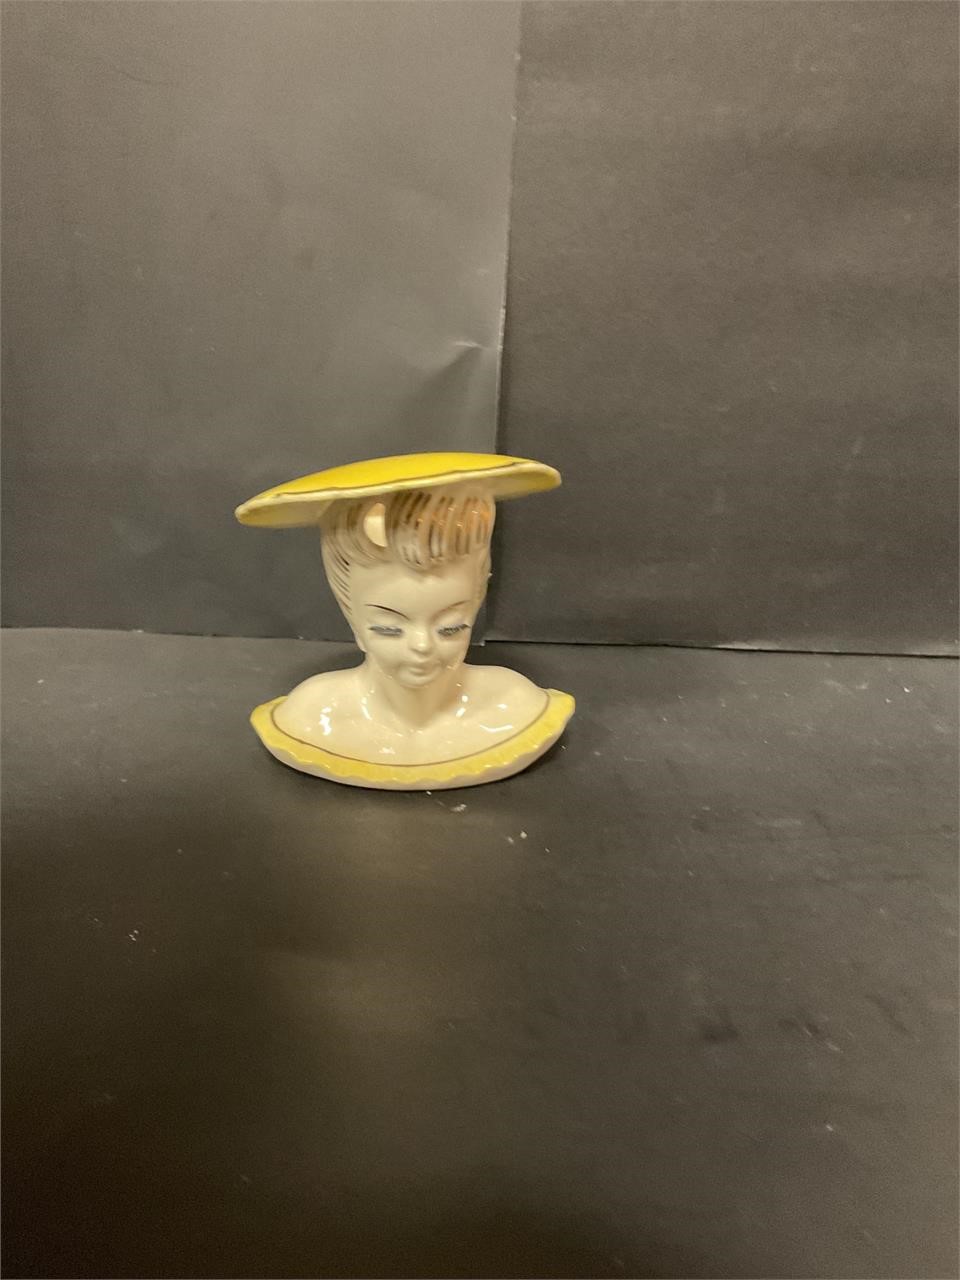 4 1/2” tall ladies head face with yellow hat